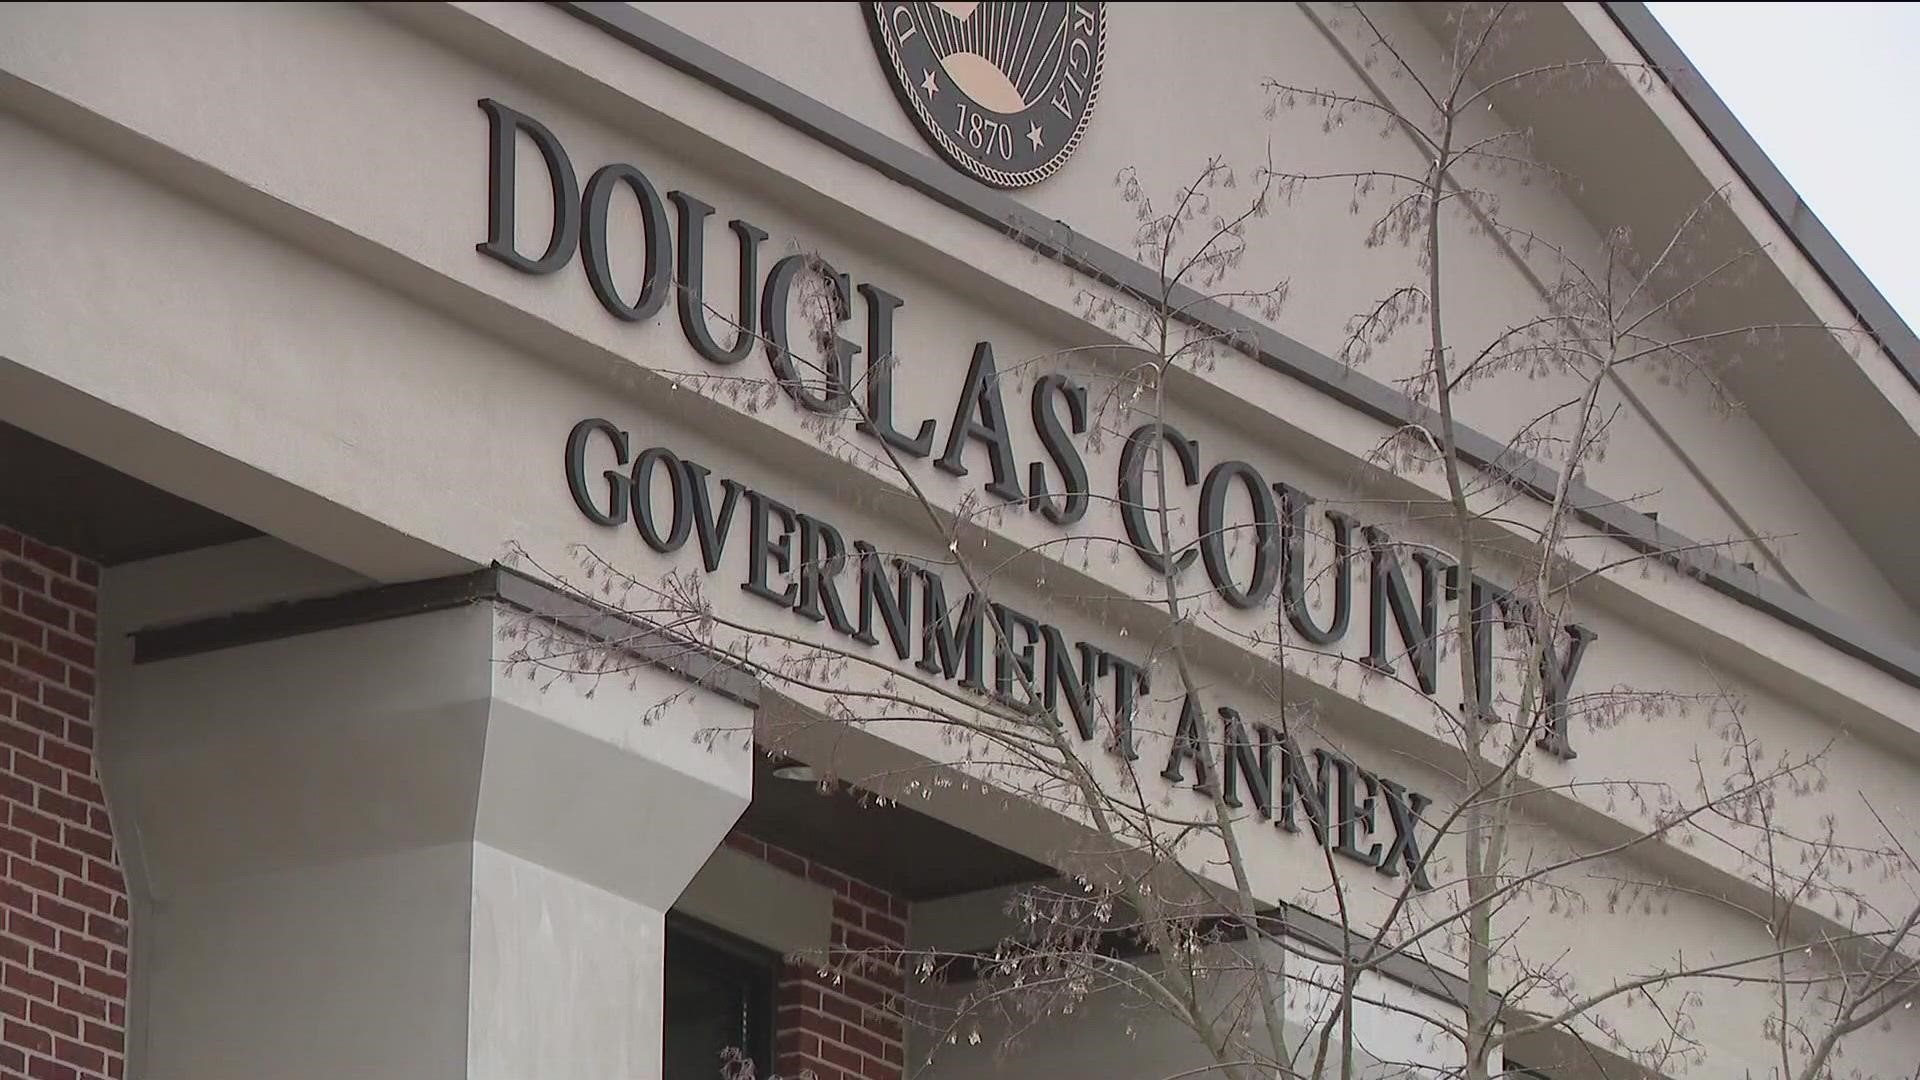 Inside the Douglas County Courthouse, prosecutors and state attorneys spent Friday morning presenting their case to a grand jury -- which returned the indictments.